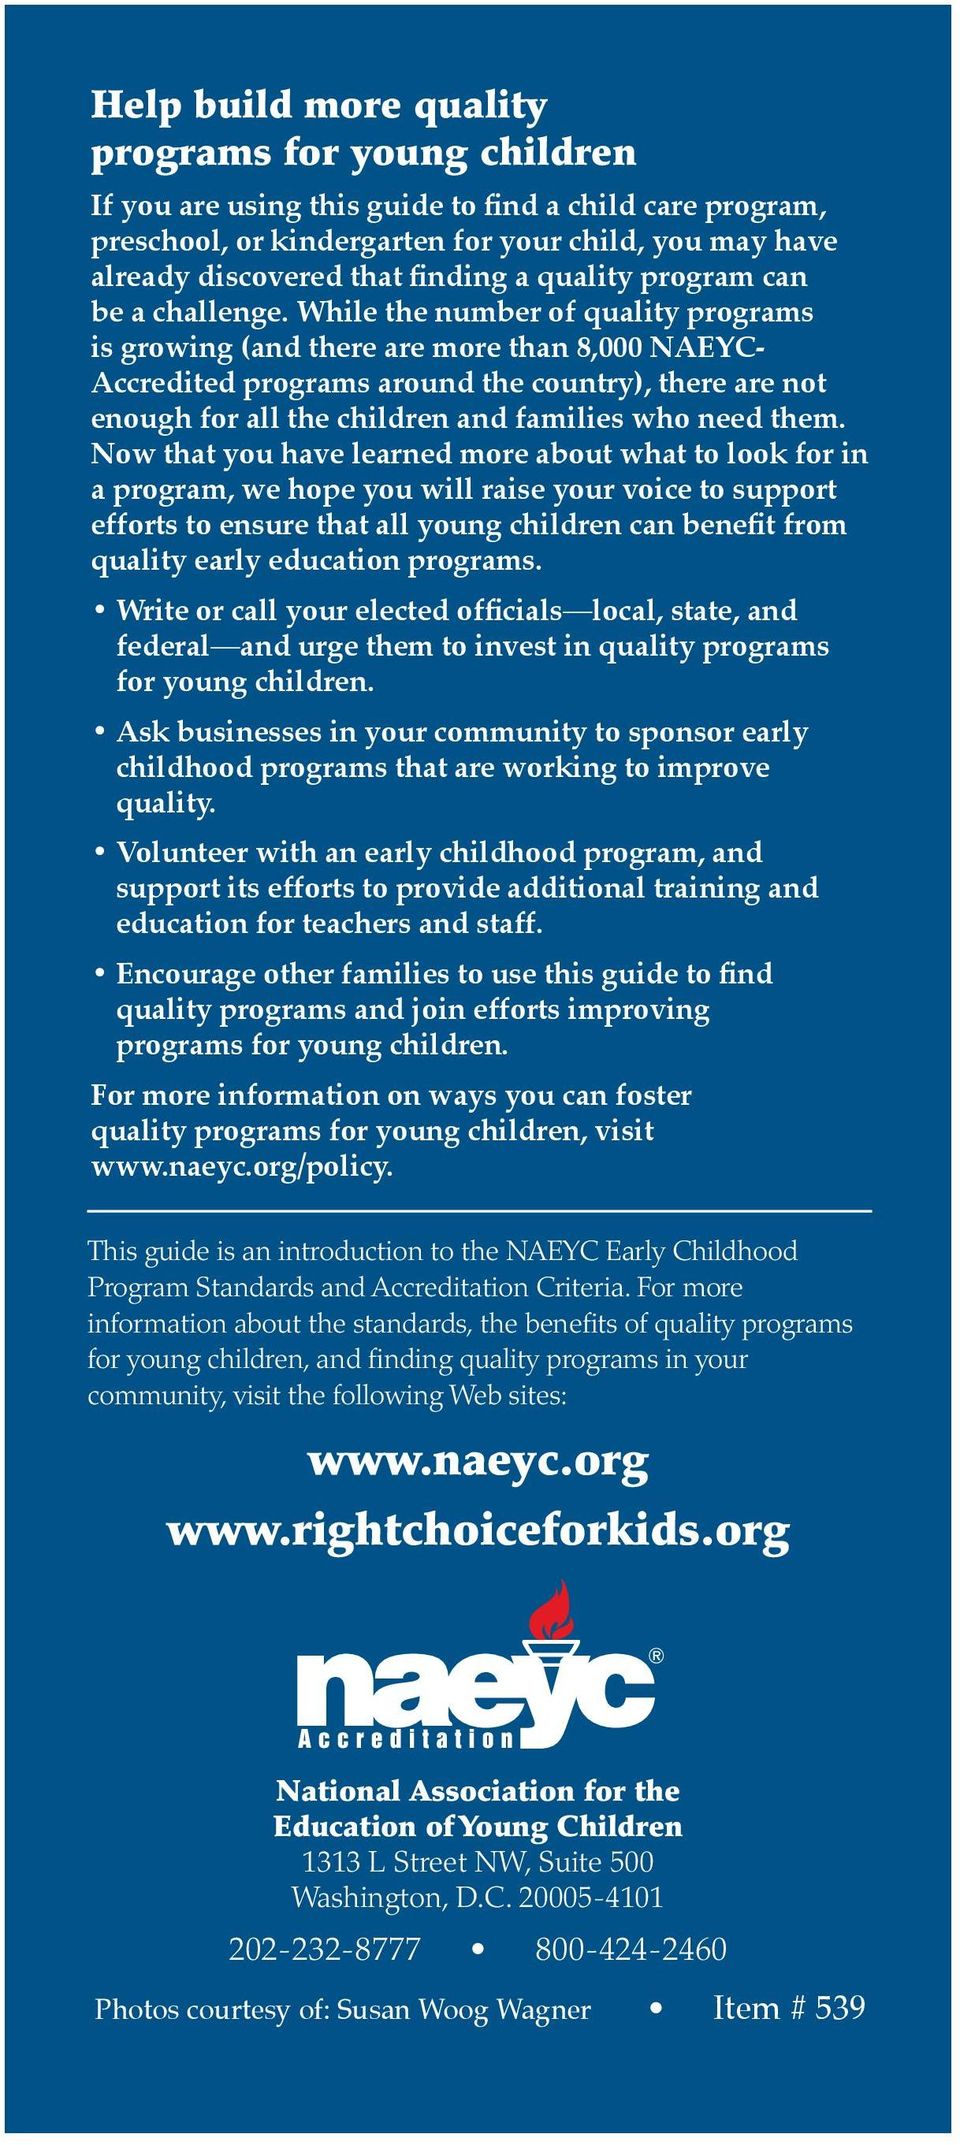 While the number of quality programs is growing (and there are more than 8,000 NAEYC- Accredited programs around the country), there are not enough for all the children and families who need them.